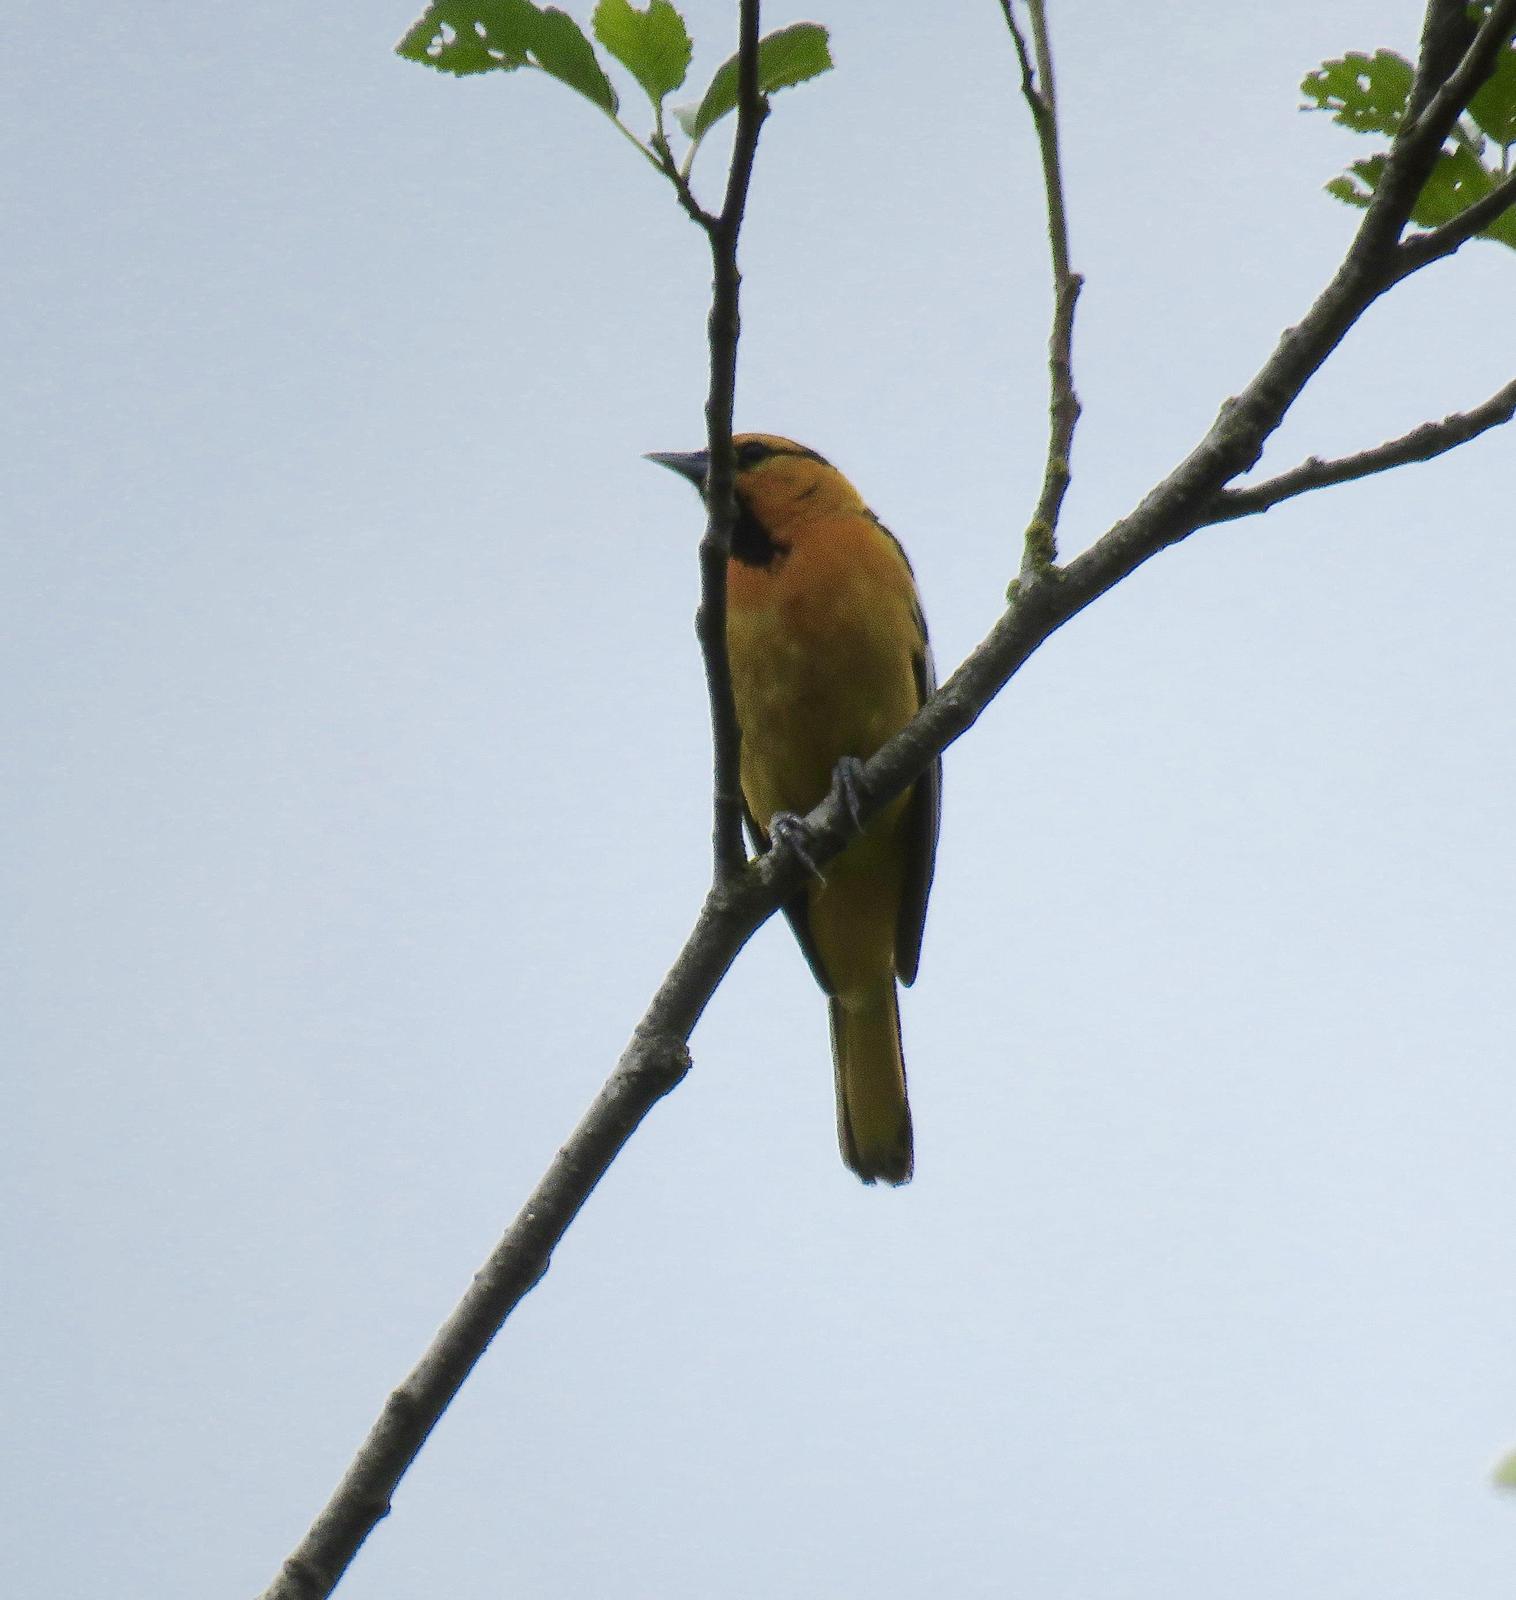 Bullock's Oriole Photo by Ted Goshulak